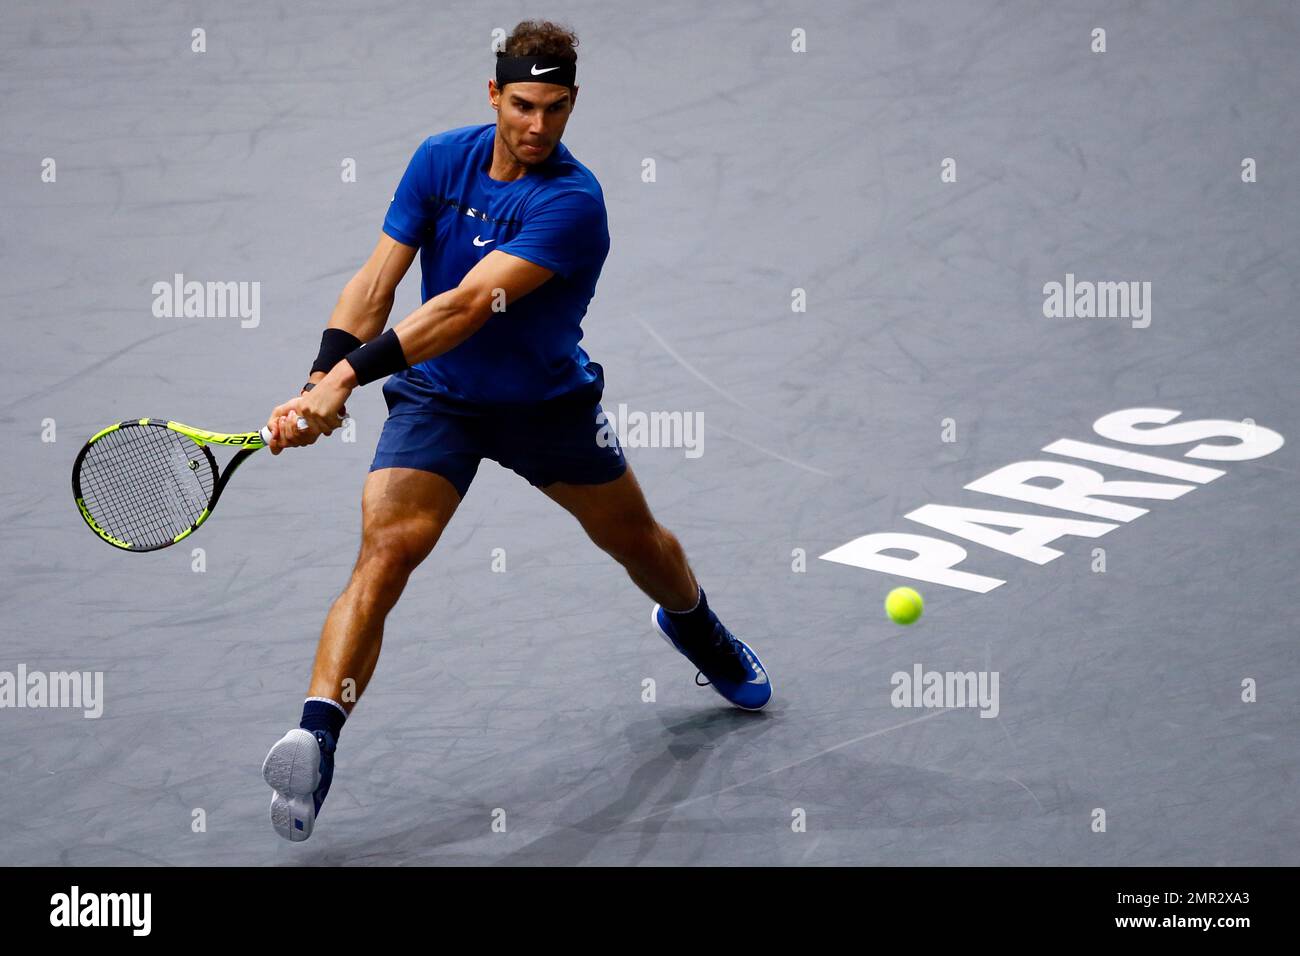 Rafael Nadal of Spain returns the ball to Pablo Cuevas of Uruguay during  the third round of the Paris Masters tennis tournament at the Bercy Arena  in Paris, France, Thursday, Nov. 2,